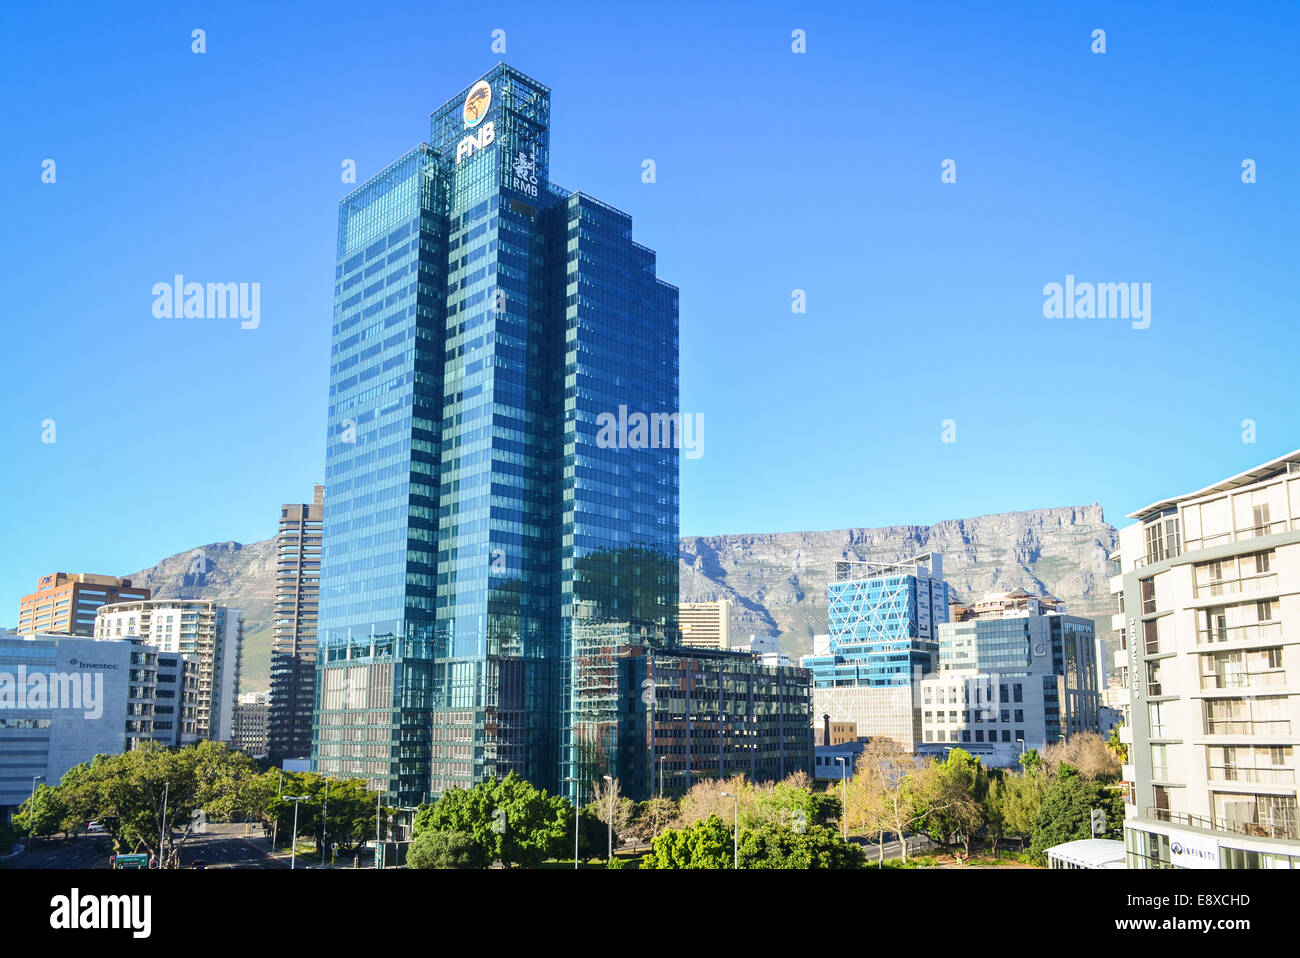 FNB RMB building in the city center of Cape Town, South Africa Stock Photo